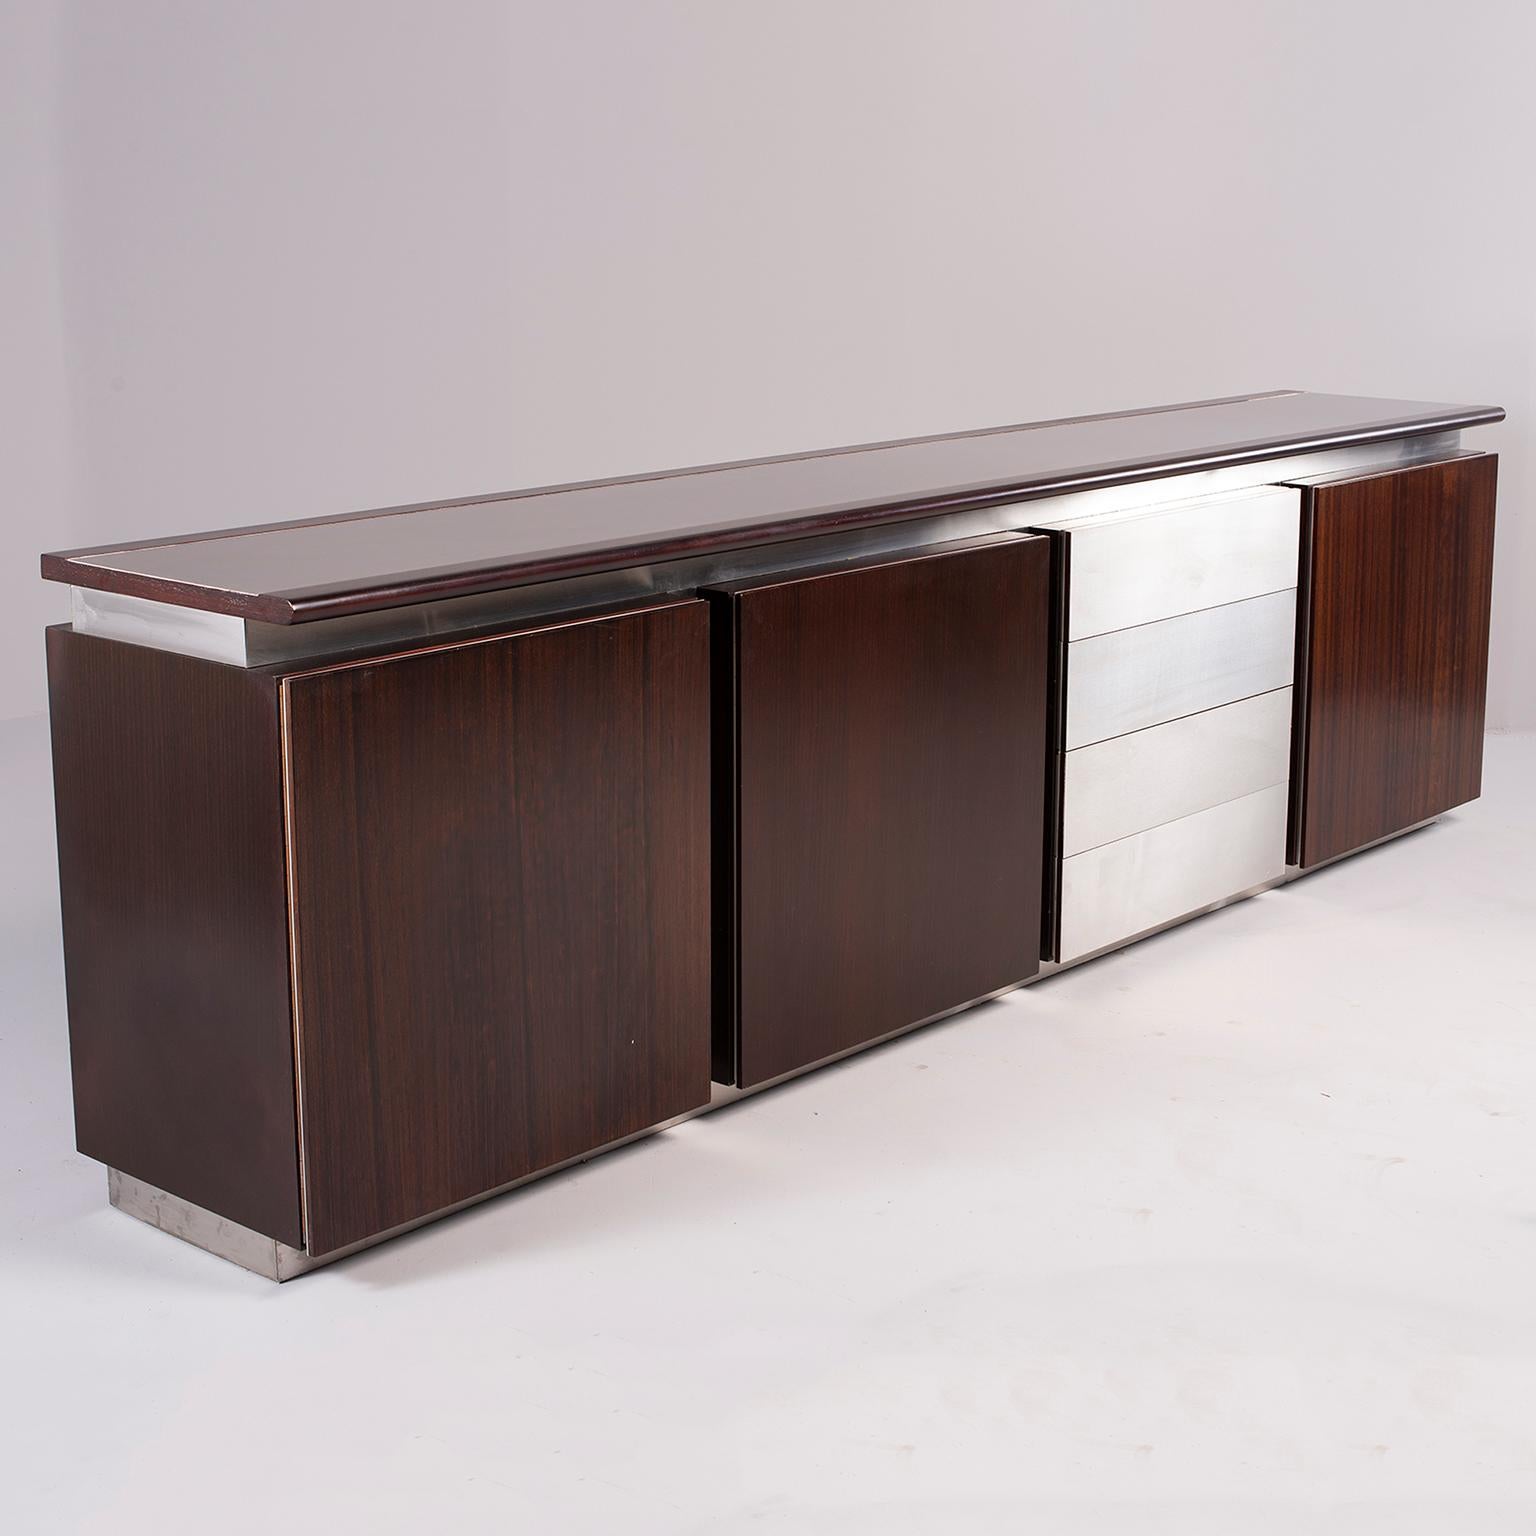 Sideboard or credenza designed by Ludovico Acerbis for Acerbis of Italy, circa 1970s. Dark rosewood with contrasting stainless steel trim and drawers. Three storage compartments with hinged doors and adjustable internal glass shelf and one set of